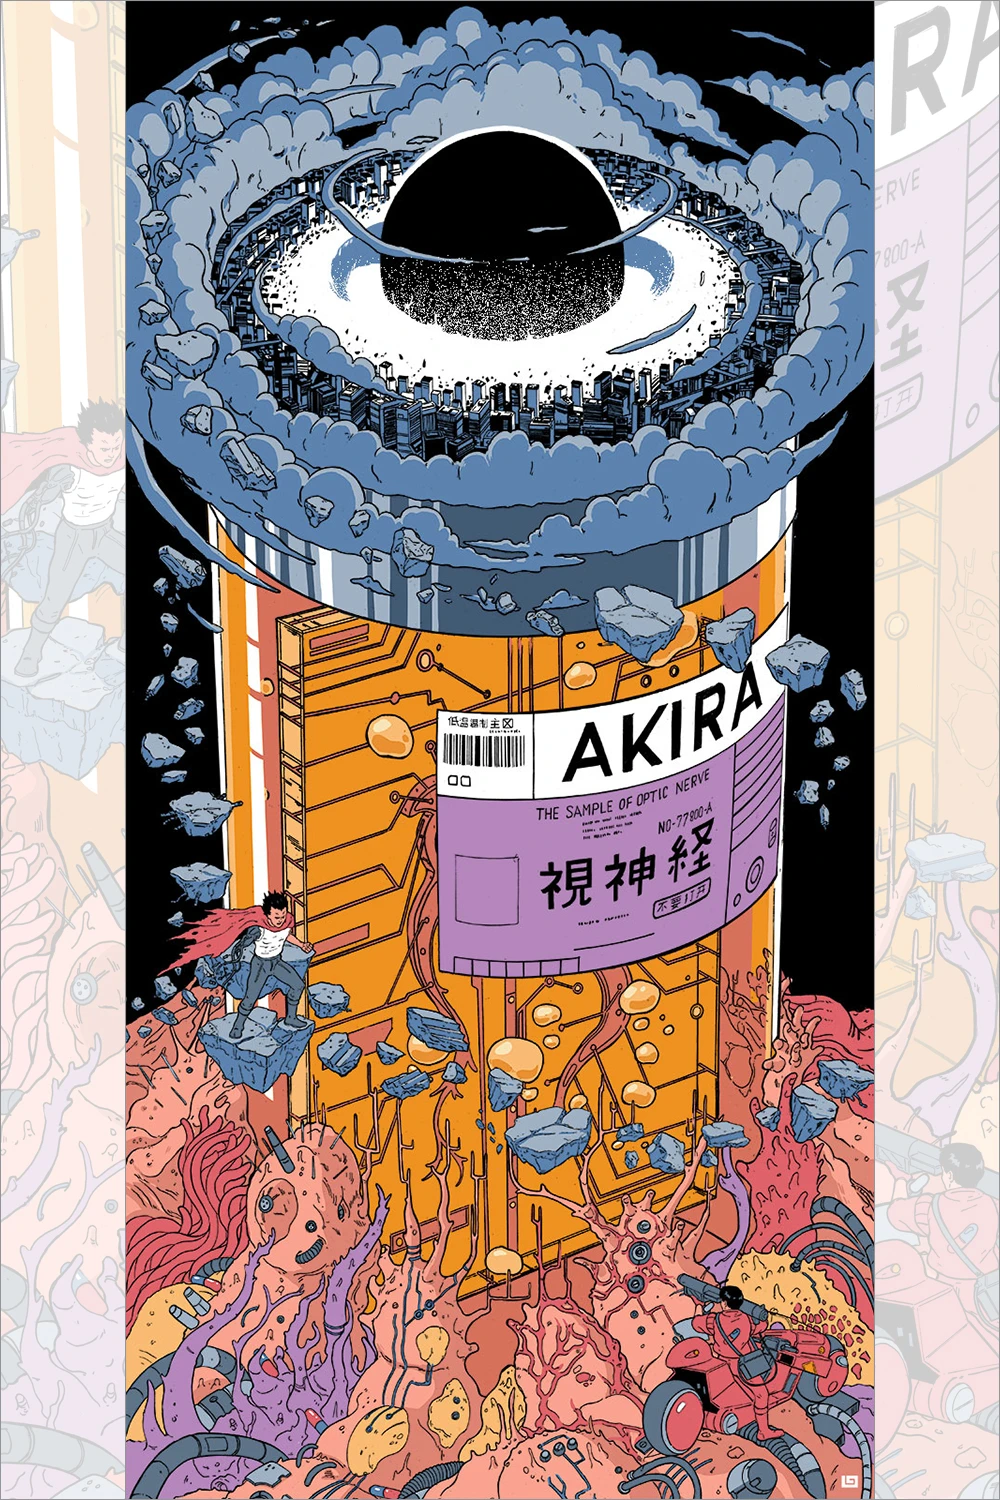 Akira” by Laurie Greasley. Art wallpaper, Anime wall art, Aesthetic anime